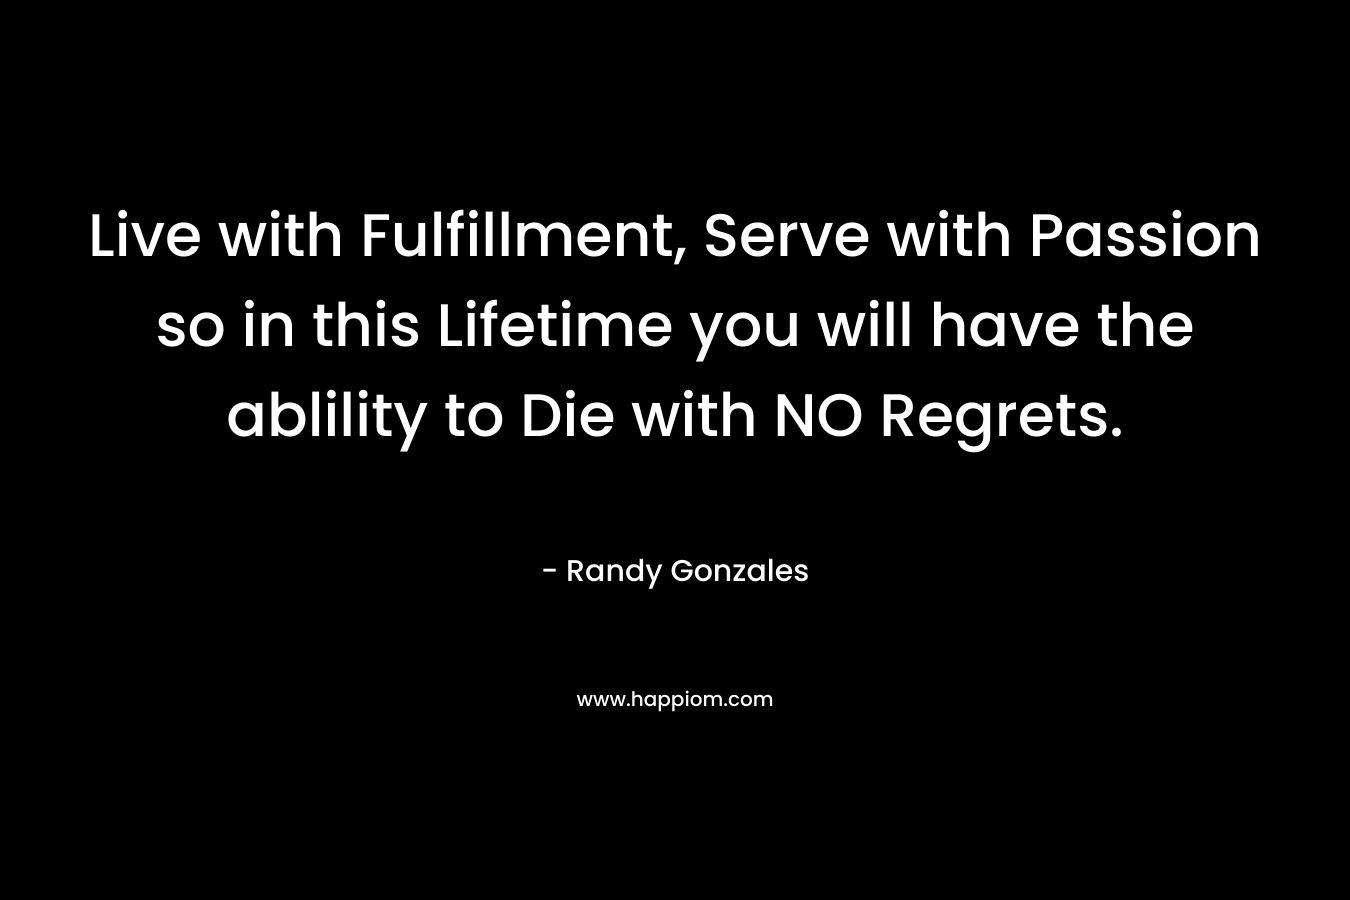 Live with Fulfillment, Serve with Passion so in this Lifetime you will have the ablility to Die with NO Regrets.